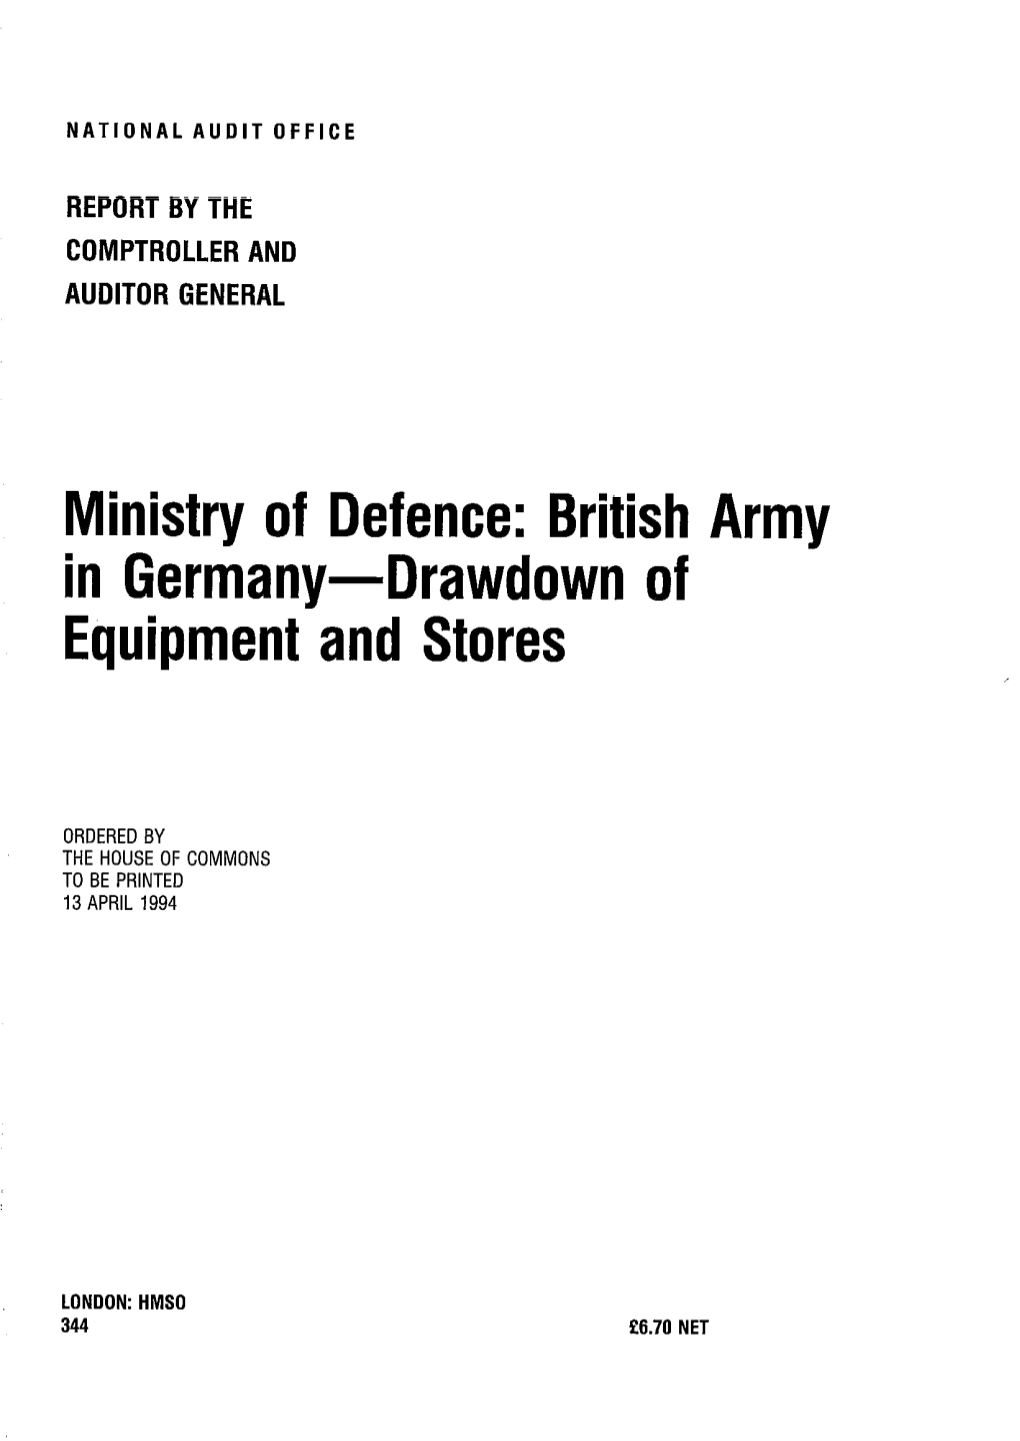 British Army in Germany – Drawdown of Equipment and Stores